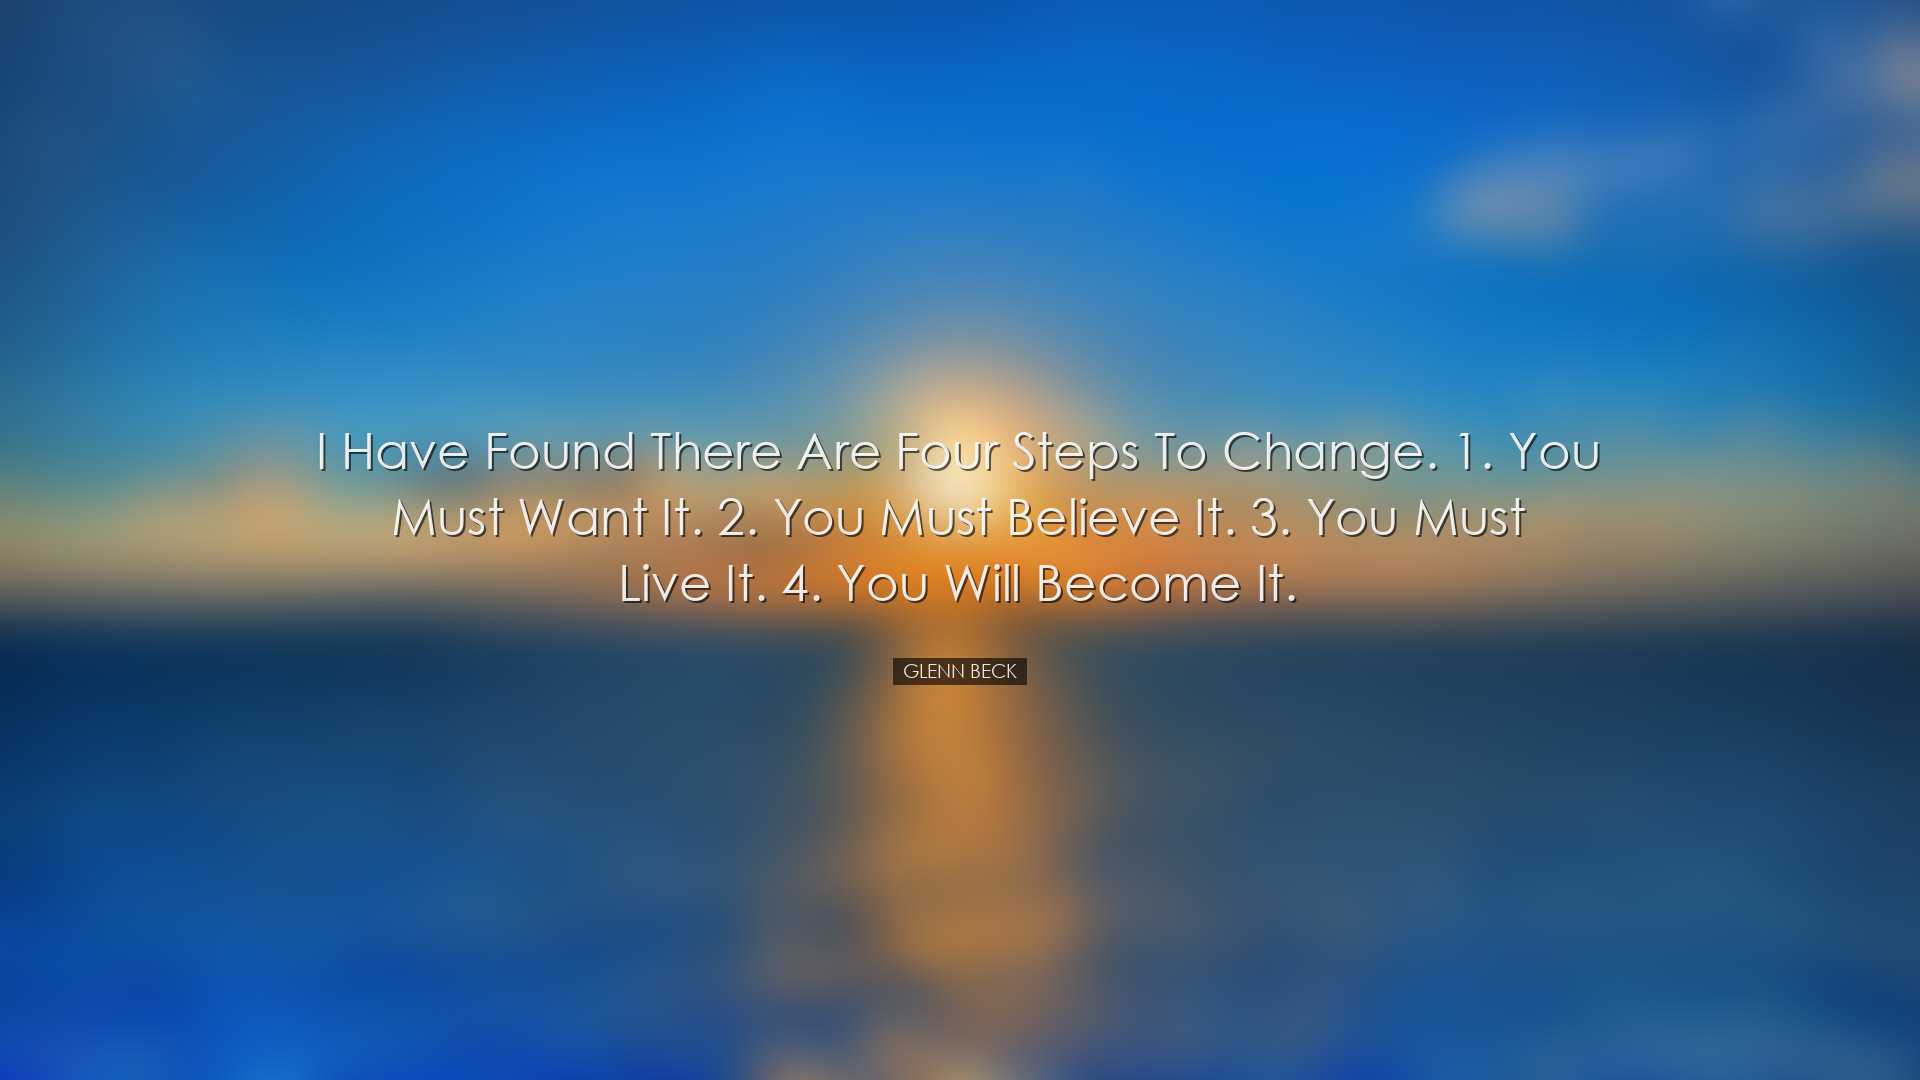 I have found there are four steps to change. 1. You must want it.